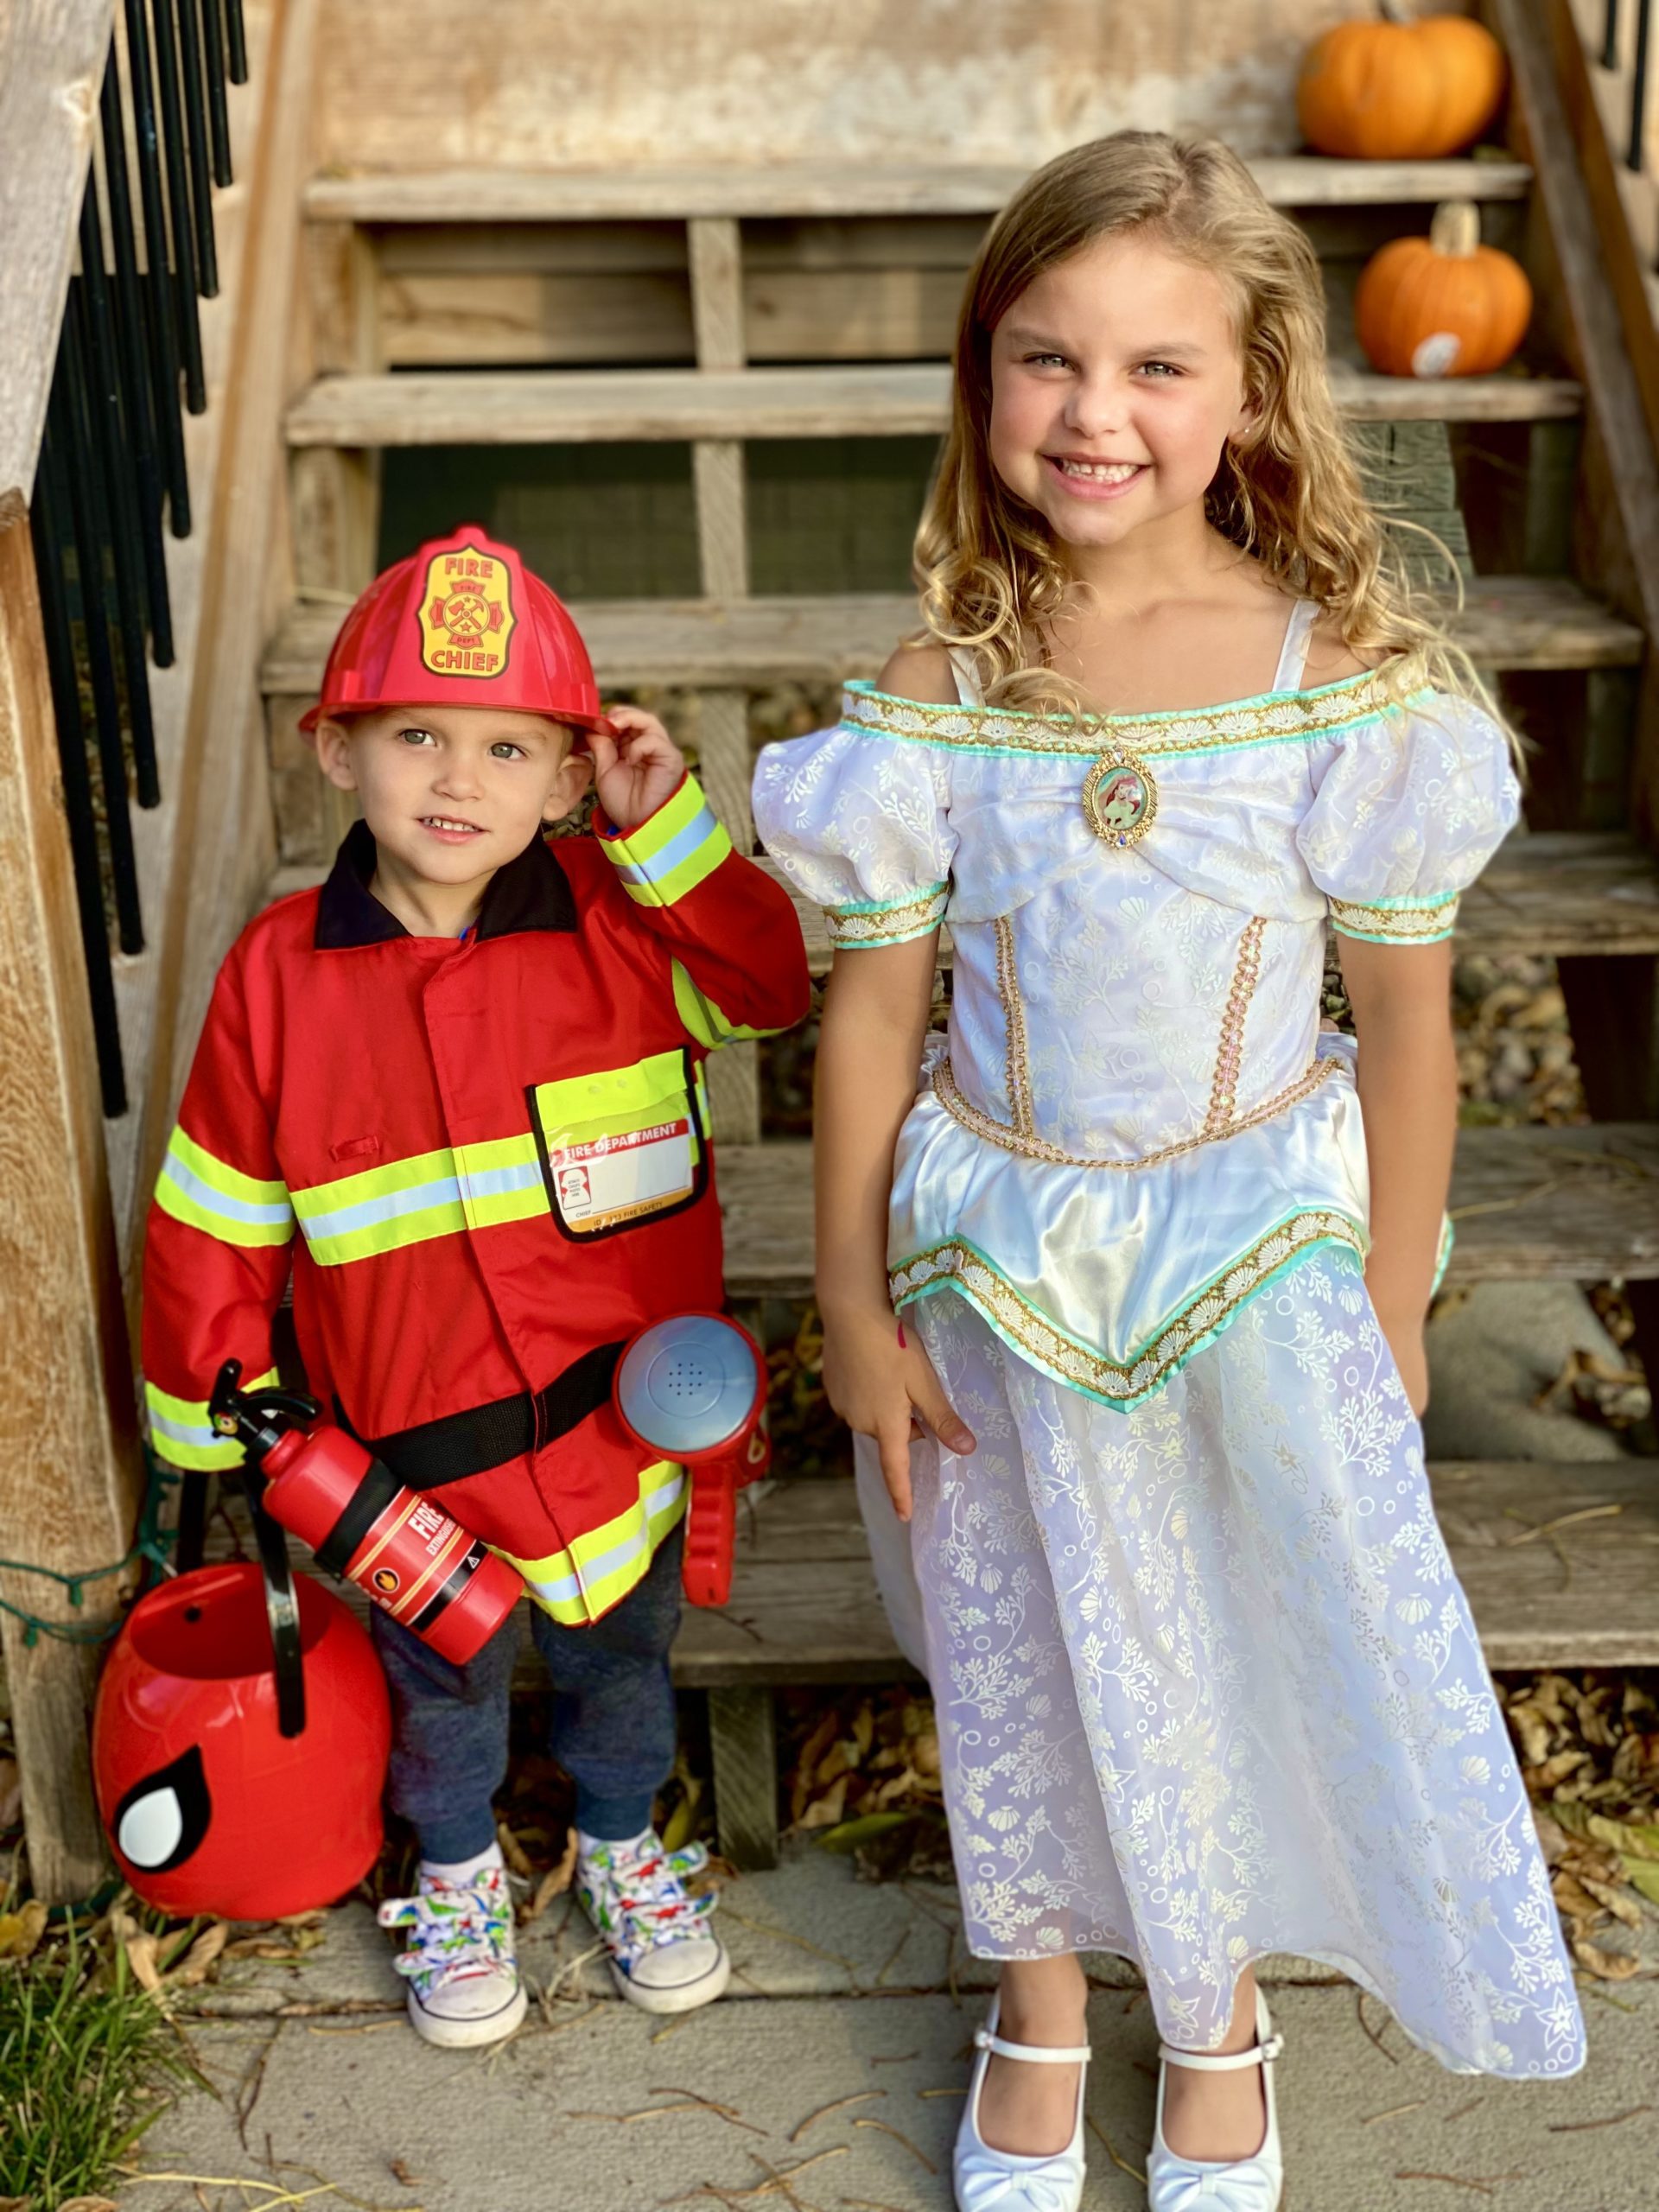 Two beautiful kids happily wearing their costume